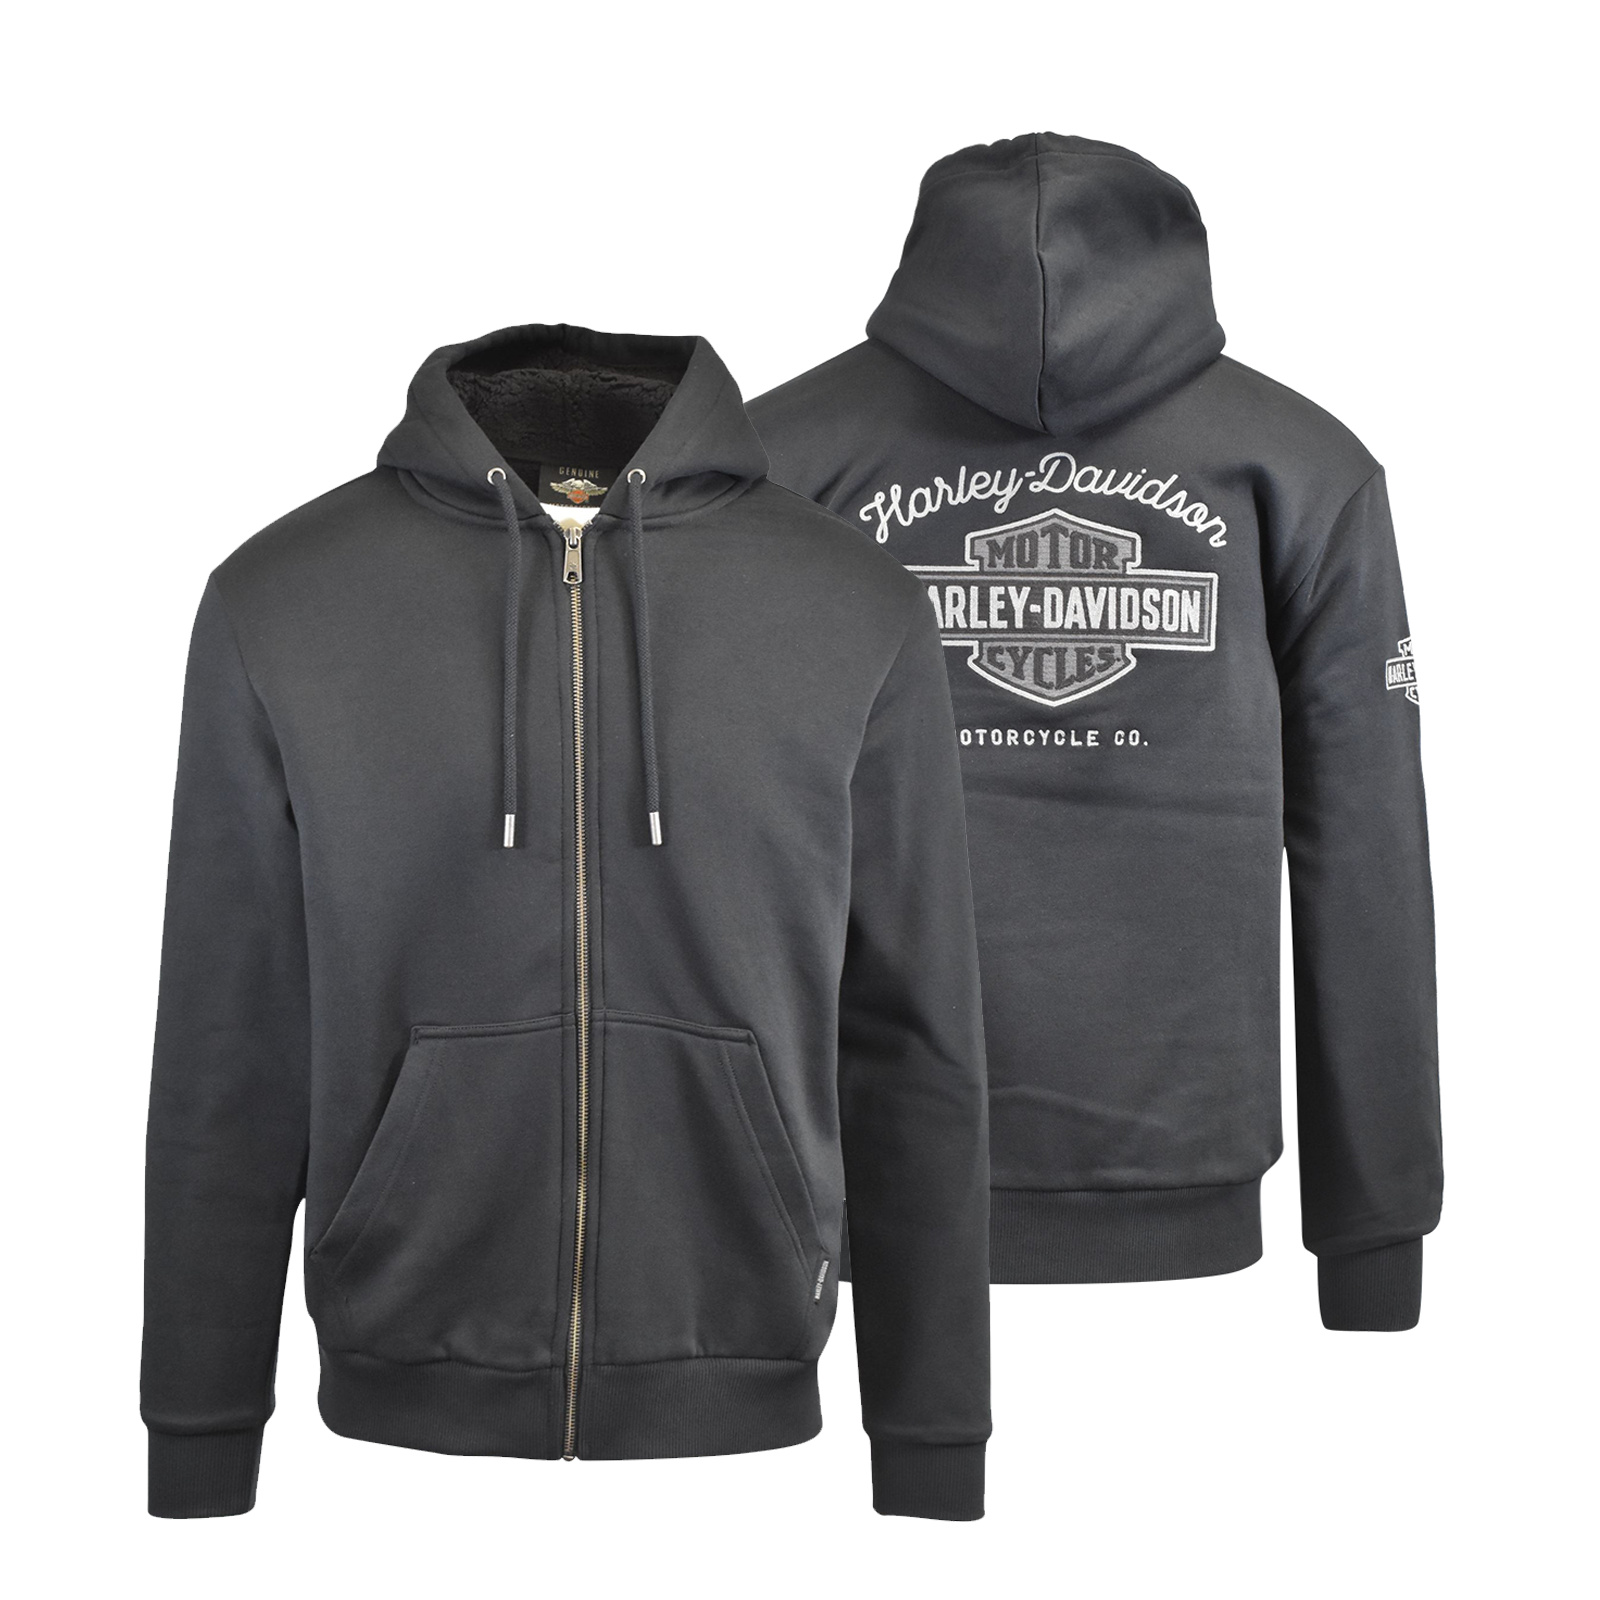 Primary image for Harley-Davidson Men's Hoodie Black Sherpa-Lined Graphic Zip Front (S10)